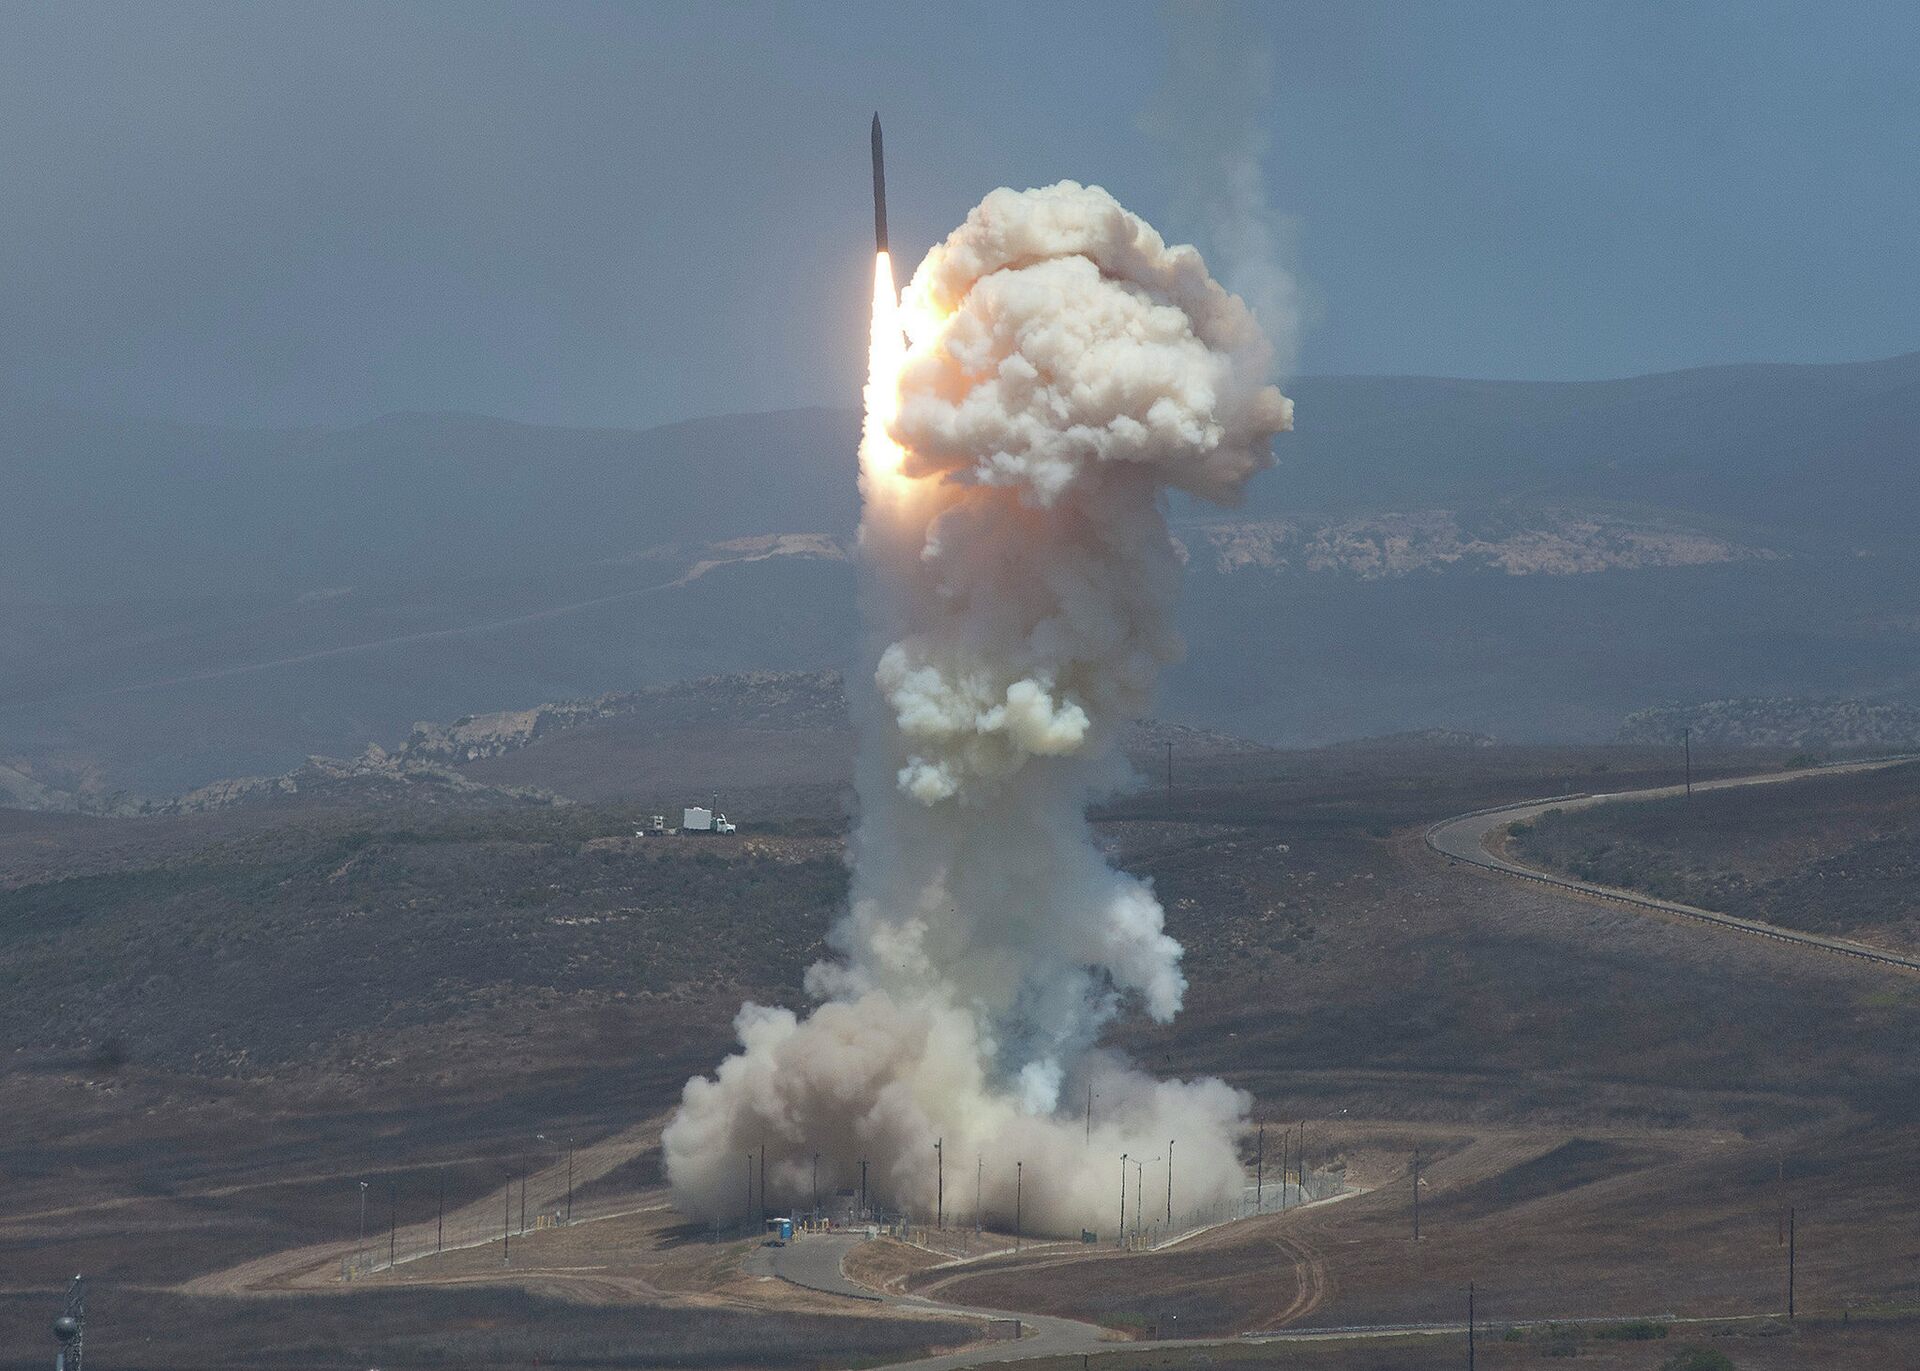 The Missile Defense Agency's test of the Ground-based Midcourse Defense (GMD). The Ground-Based Interceptor launches from Vandenberg Air Force Base, Calif. on June 22, 2014. - Sputnik International, 1920, 27.10.2022